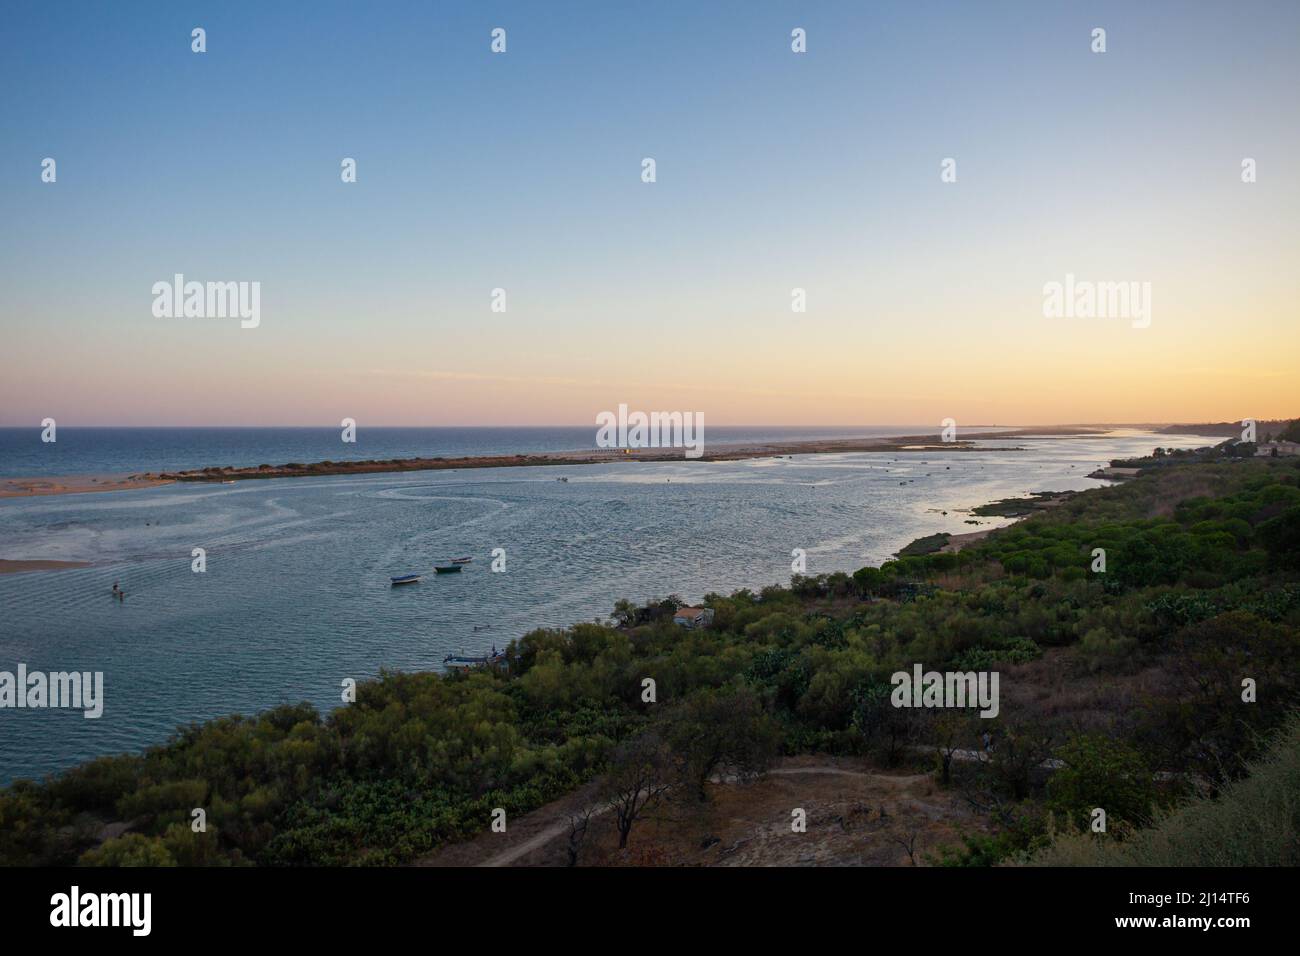 A view to the easternmost lagoon of the Ria Formosa at sunset, from the village of Cacela Velha situated on top of a hill, Algarve, Portugal. Stock Photo